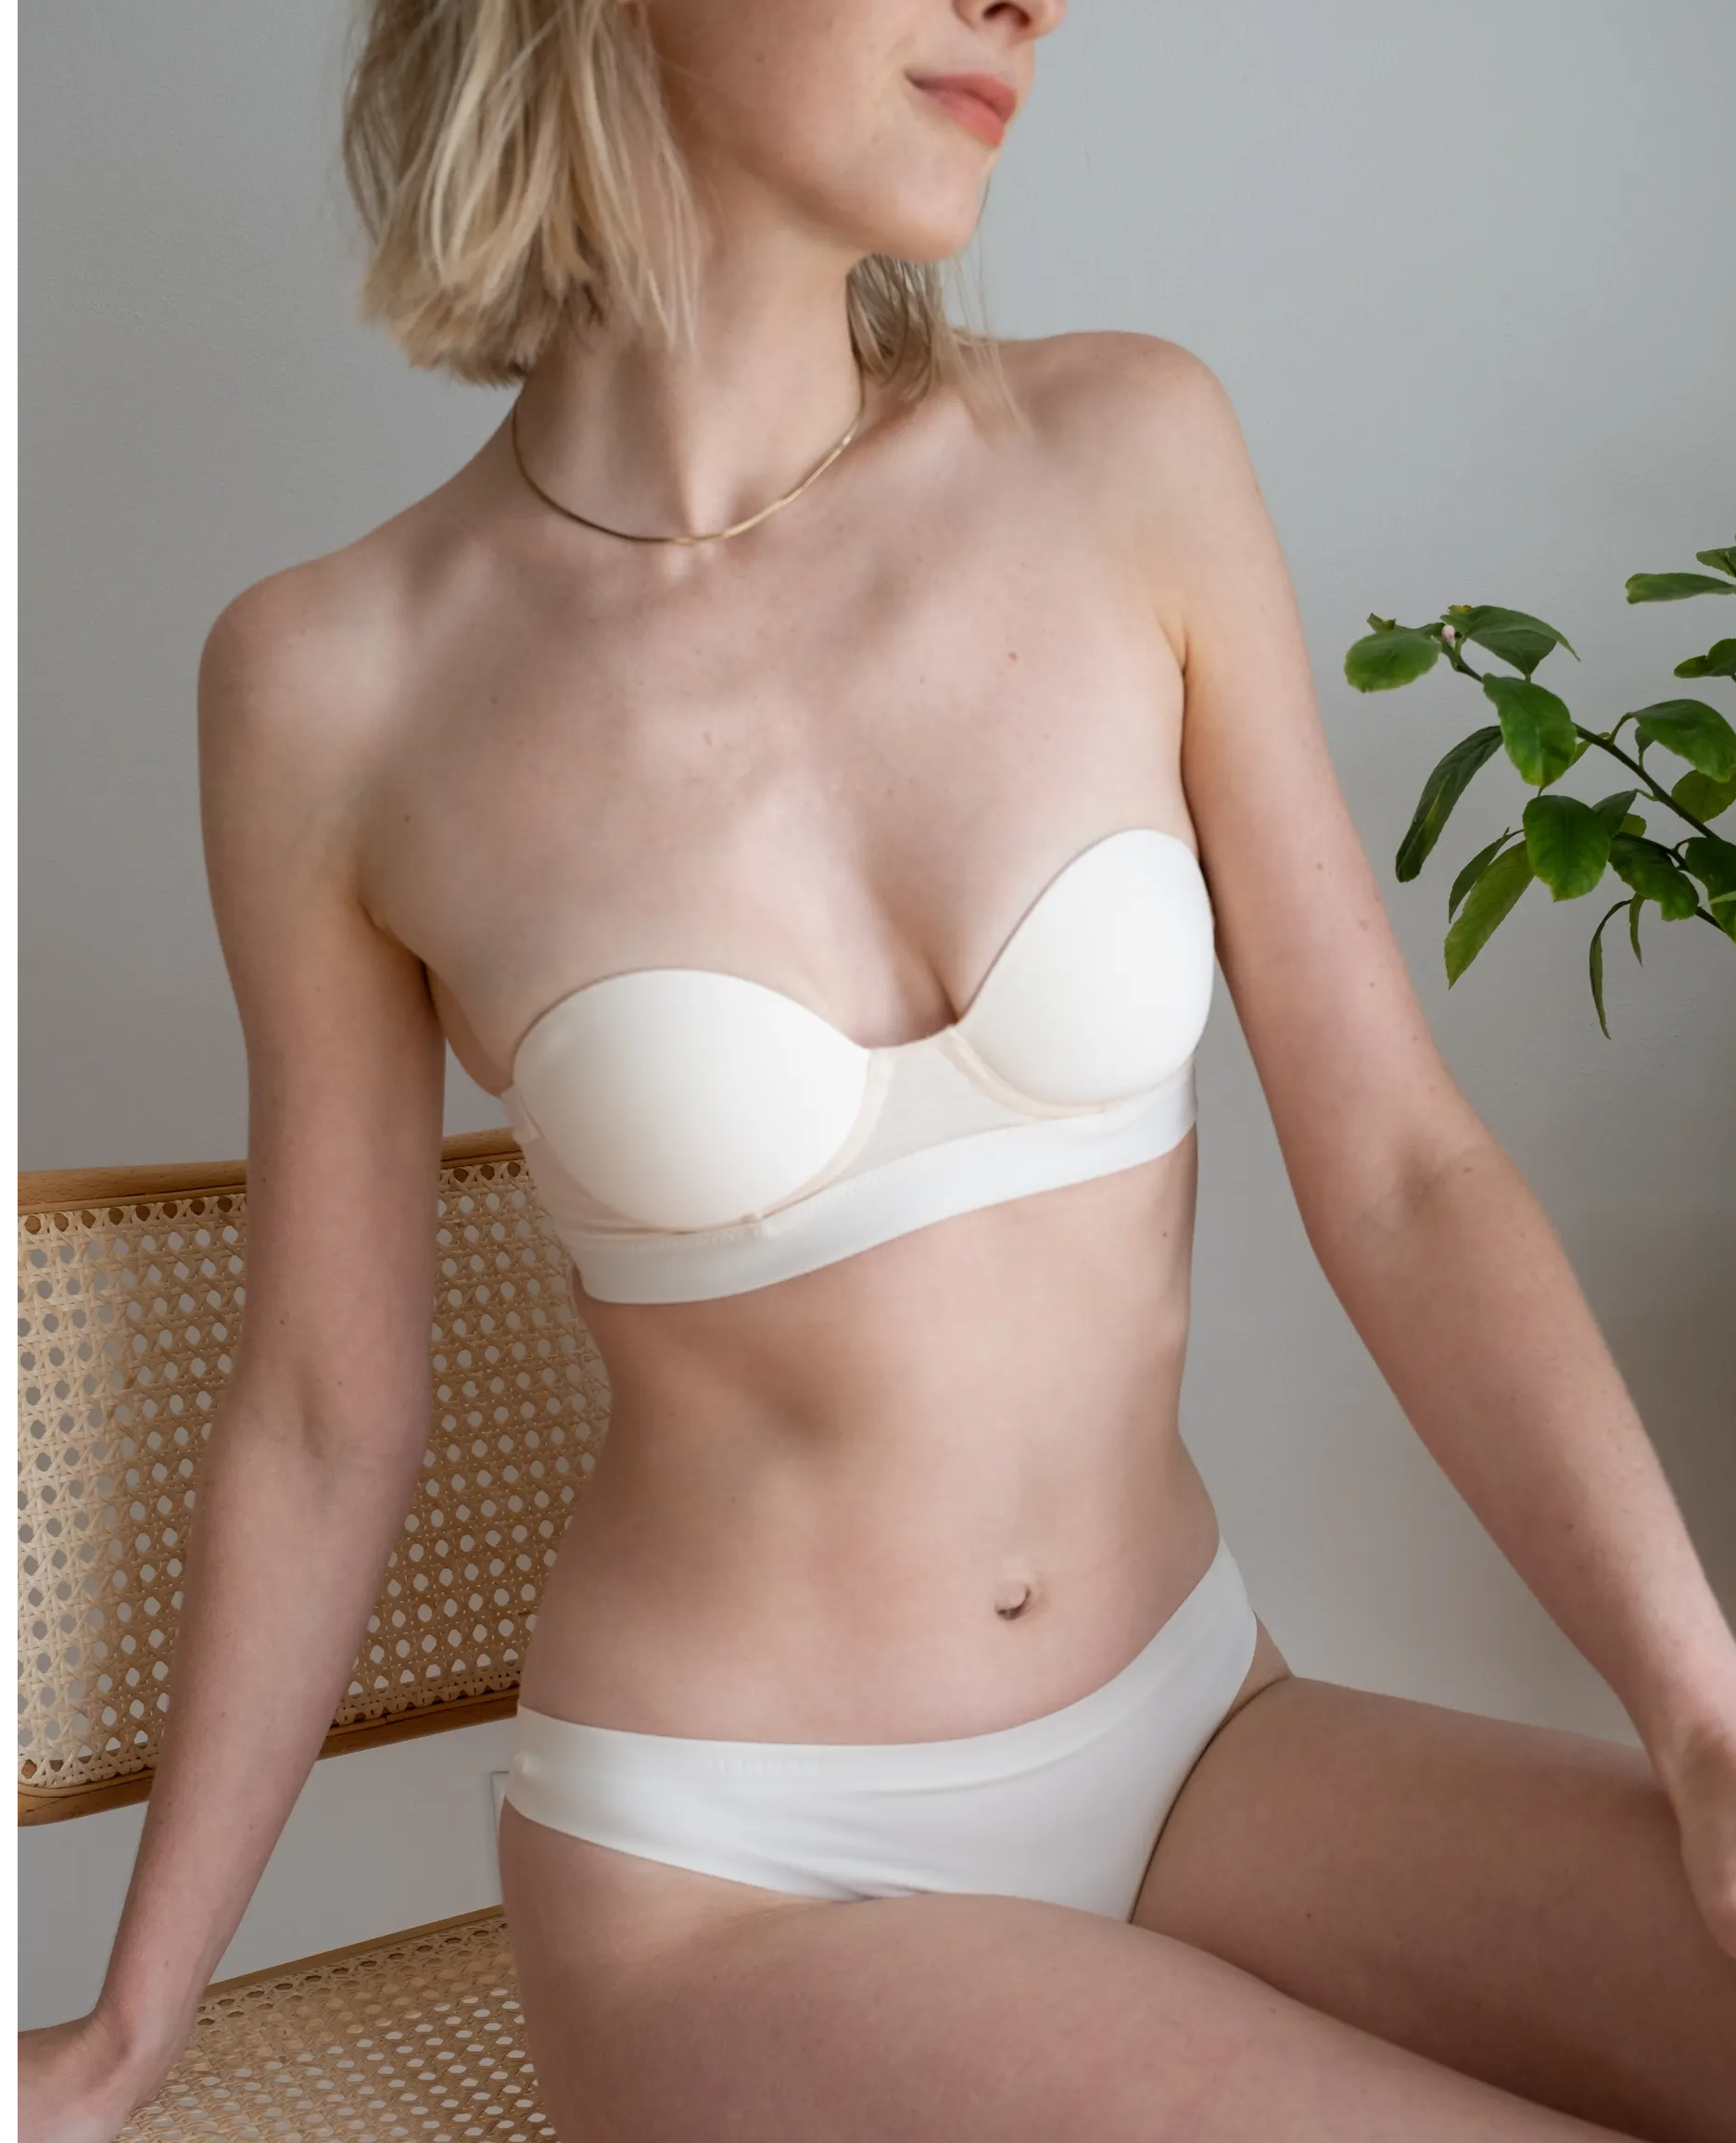 b cup size the best bras for small busts in white strapless bra